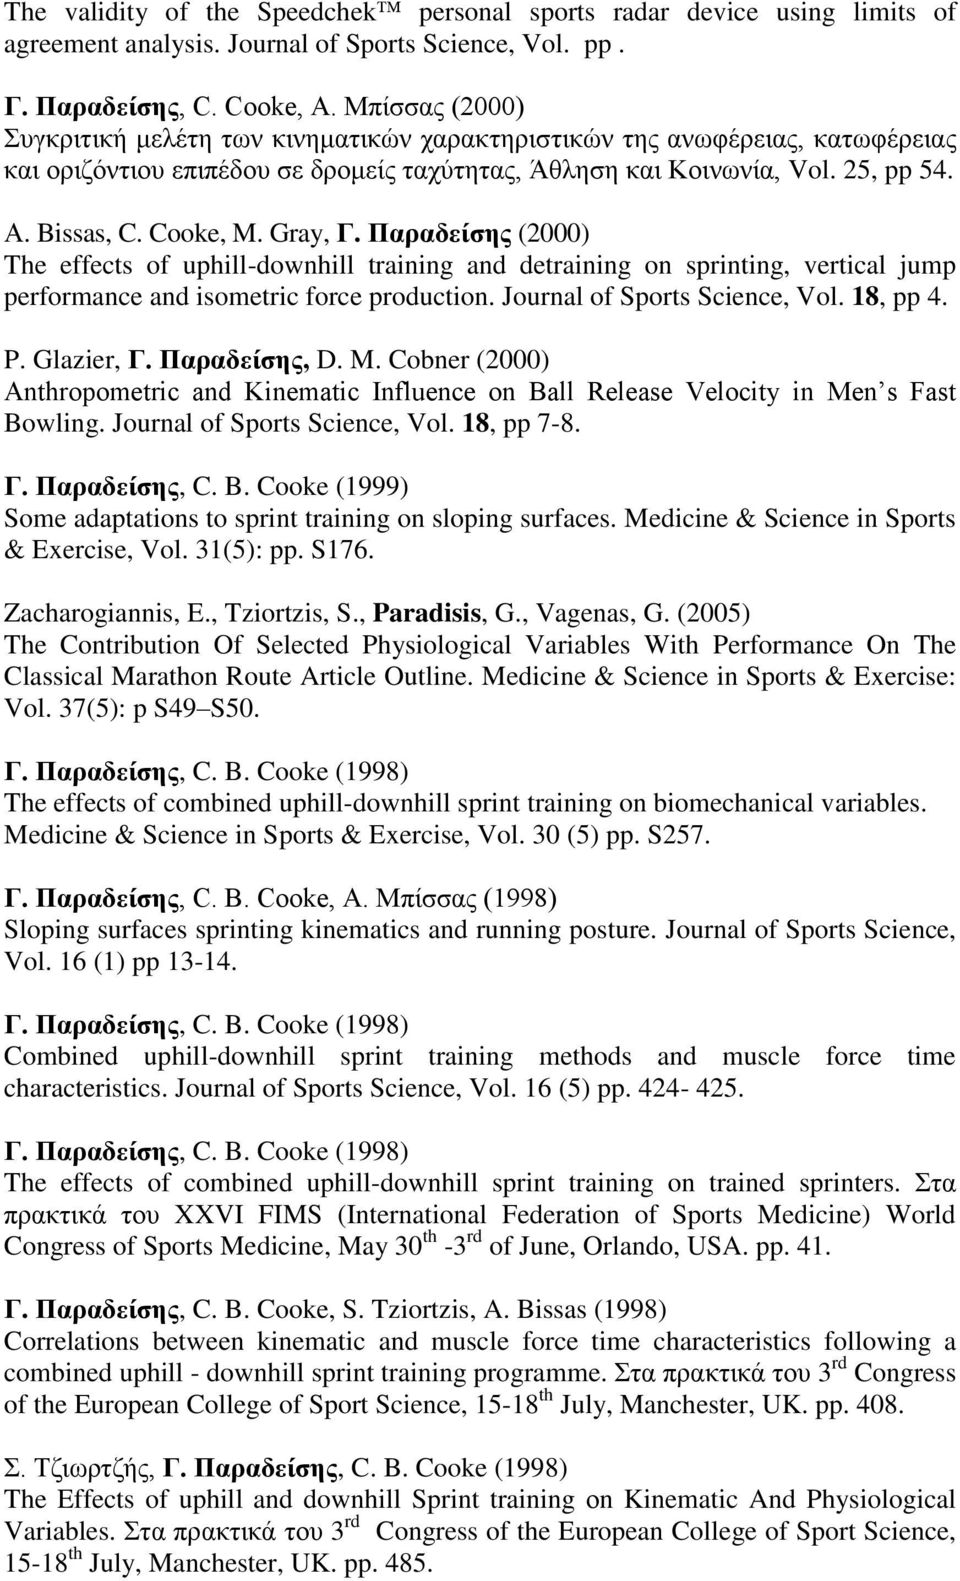 Gray, Γ. Παραδείσης (2000) The effects of uphill-downhill training and detraining on sprinting, vertical jump performance and isometric force production. Journal of Sports Science, Vol. 18, pp 4. P.